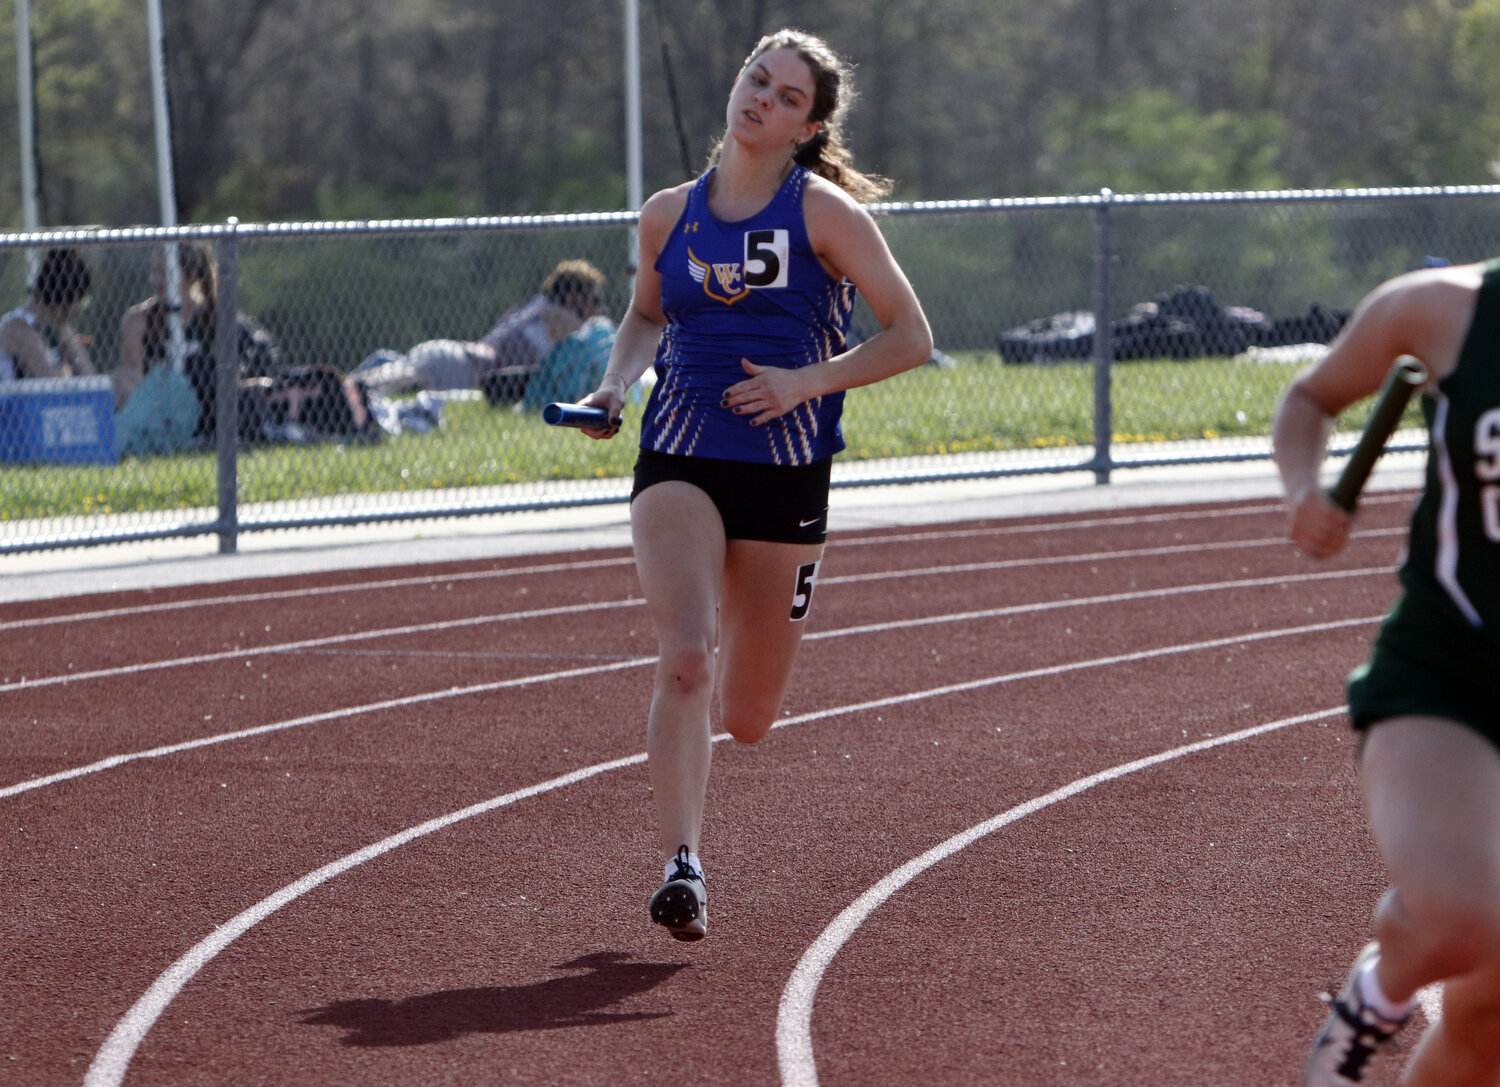 Elizabeth Riggs runs her portion of a relay race at last week's Wright City Invitational.